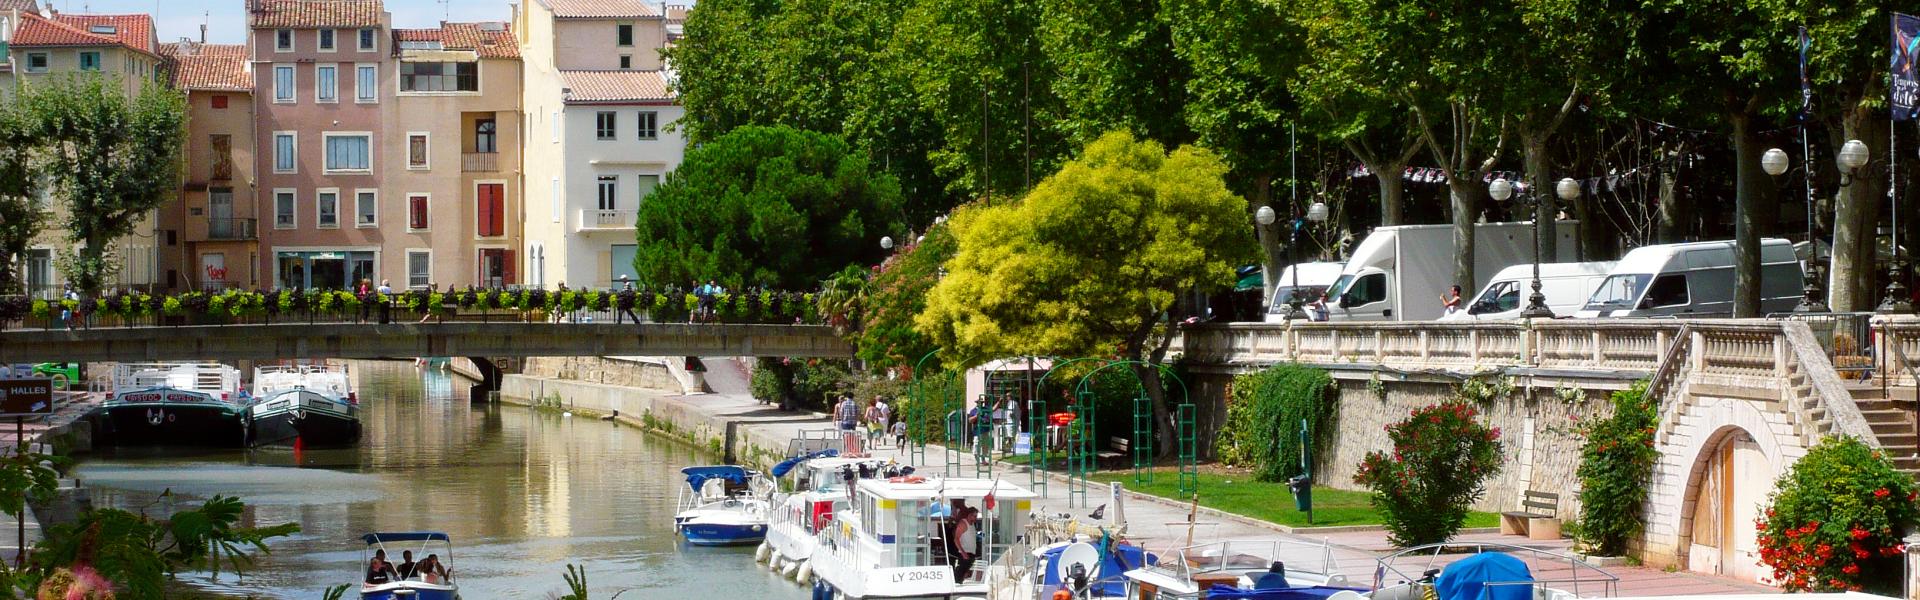 Narbonne, Department of Aude, Languedoc-Roussillon. The town is bisected by the Canal de la Robine.